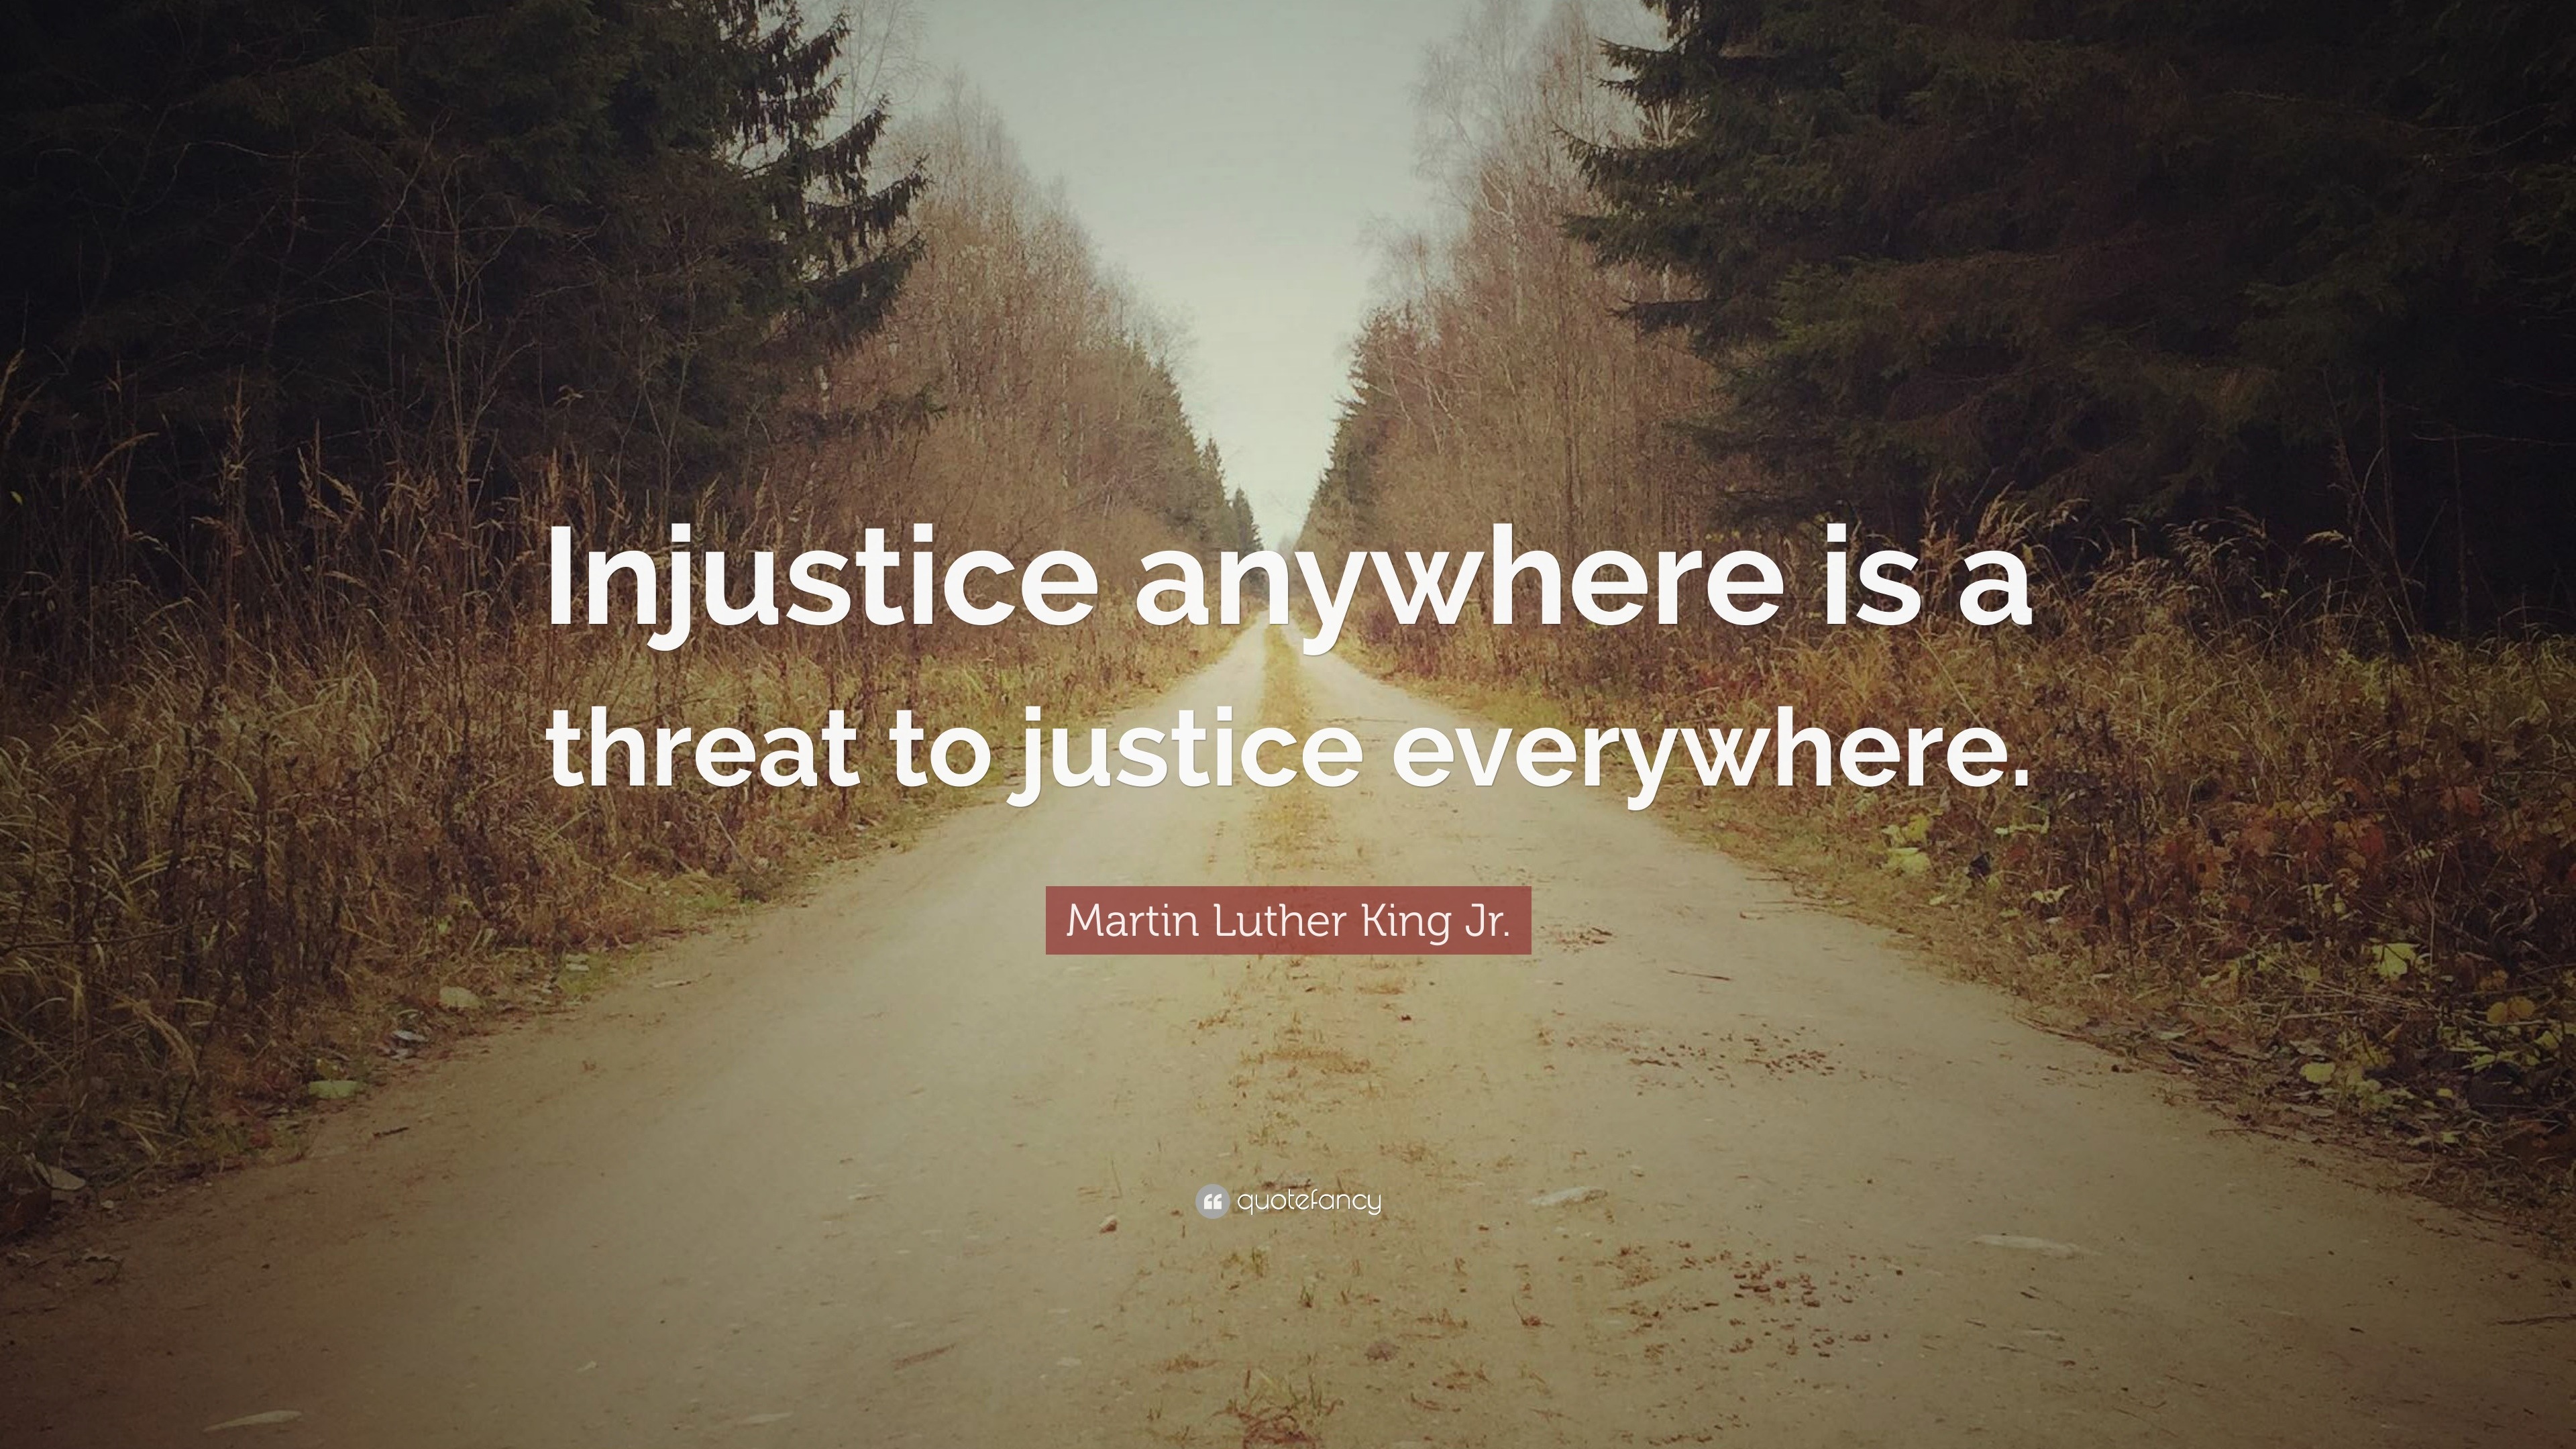 1717601 Martin Luther King Jr Quote Injustice anywhere is a threat to